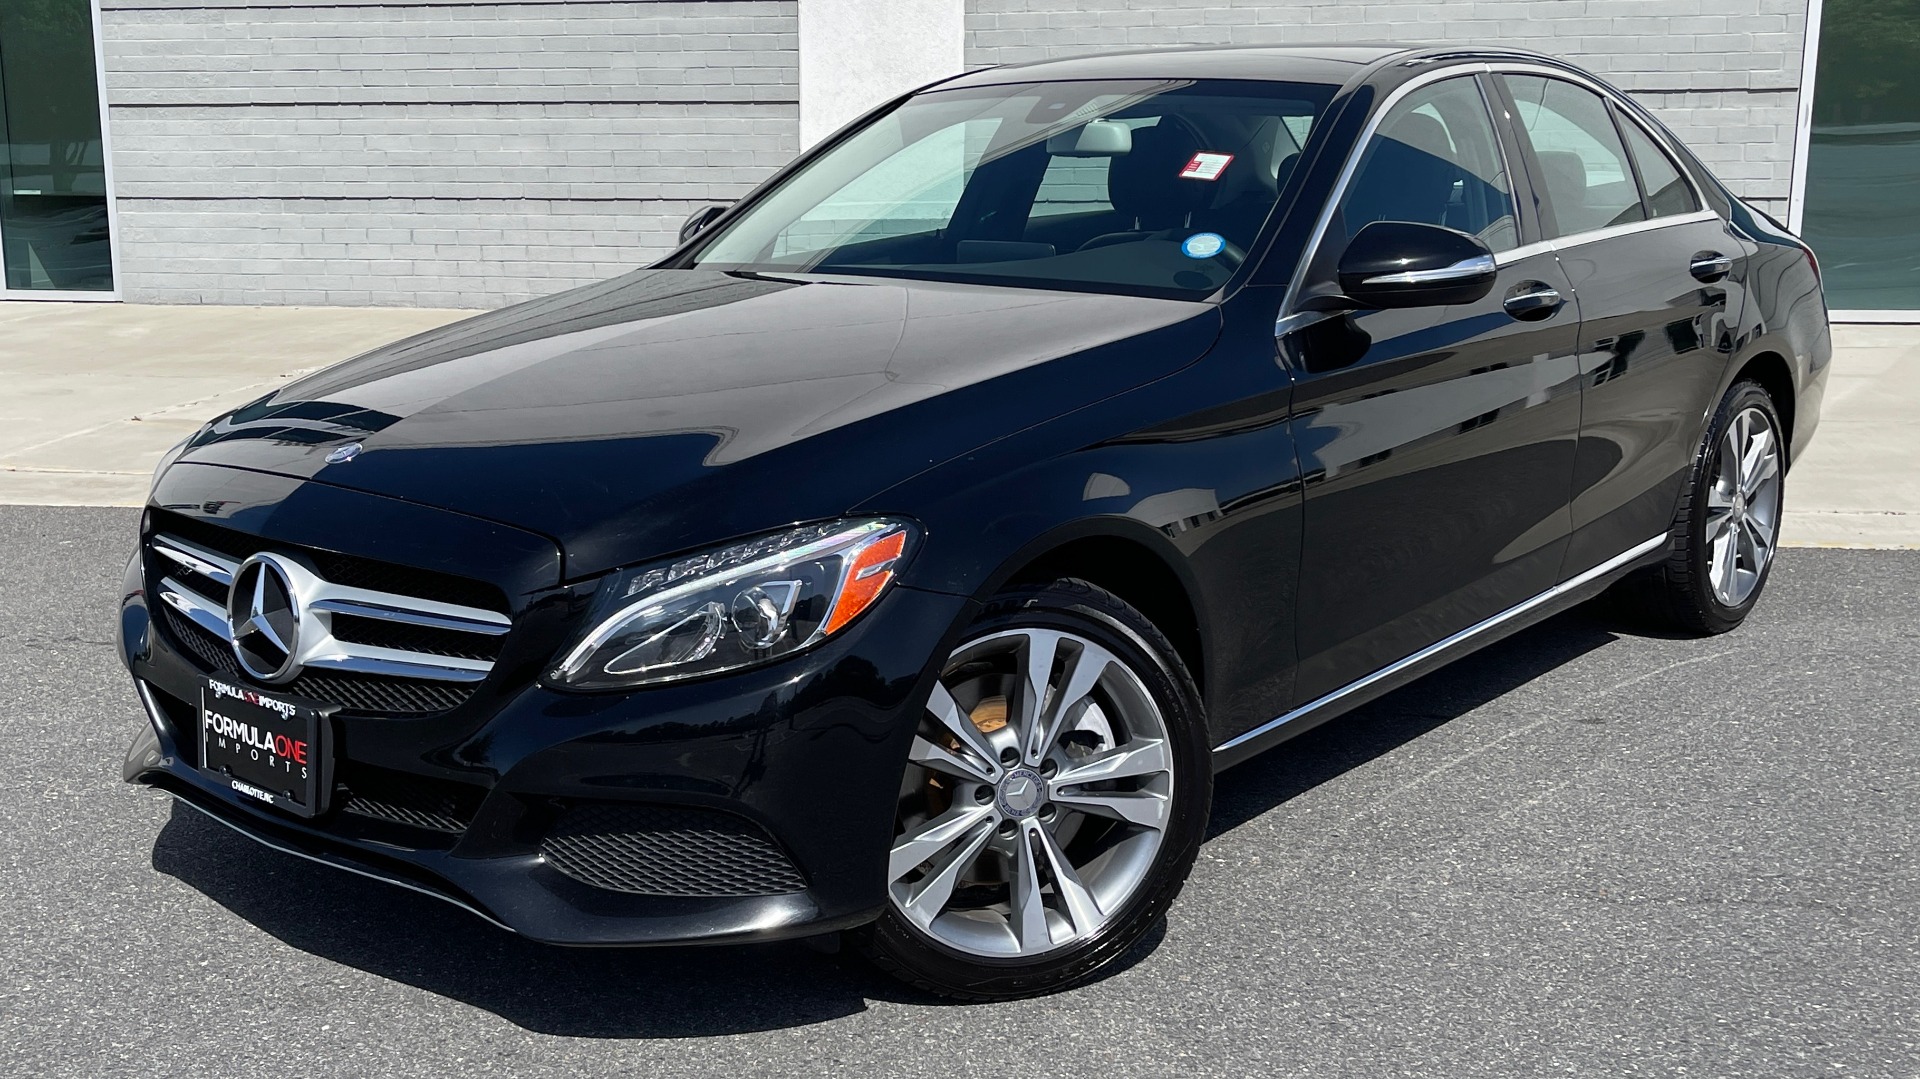 Used 2015 Mercedes-Benz C-CLASS C 300 4MATIC PREMIUM / MULTI MEDIA PKG / BSA / REARVIEW for sale Sold at Formula Imports in Charlotte NC 28227 1